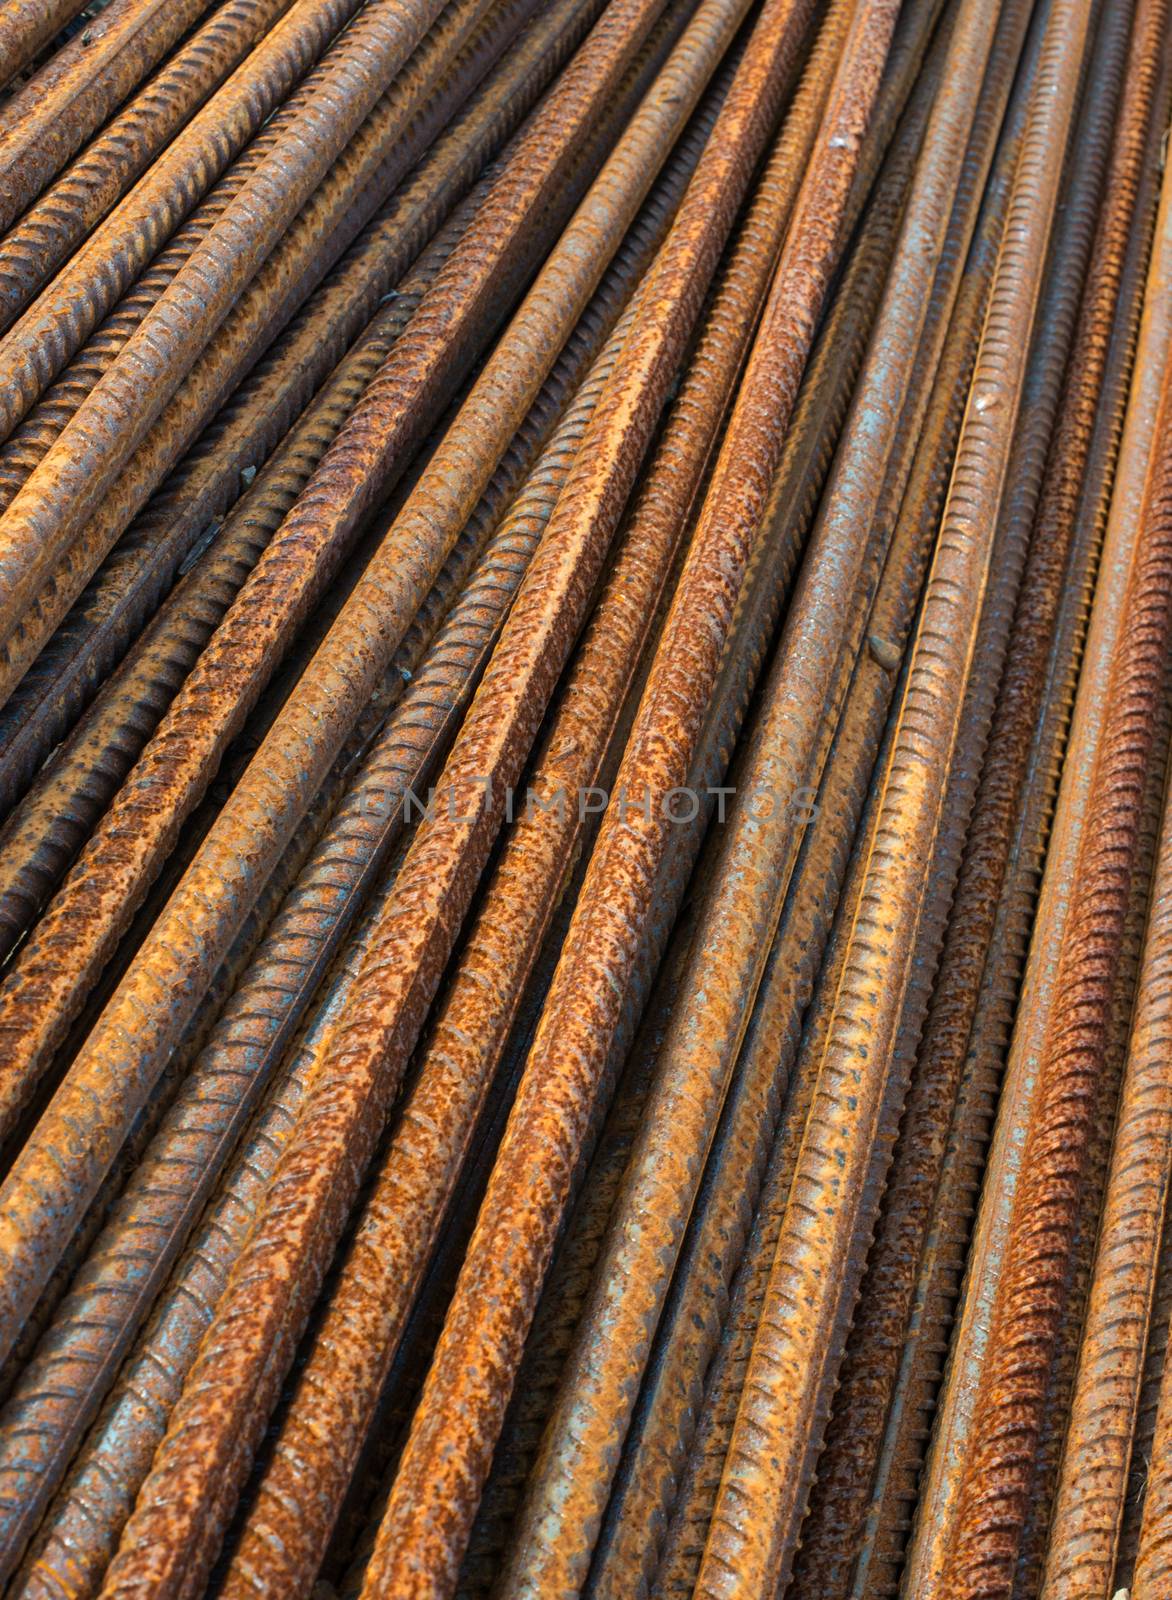 Stack of the metal rusty reinforcement bars.